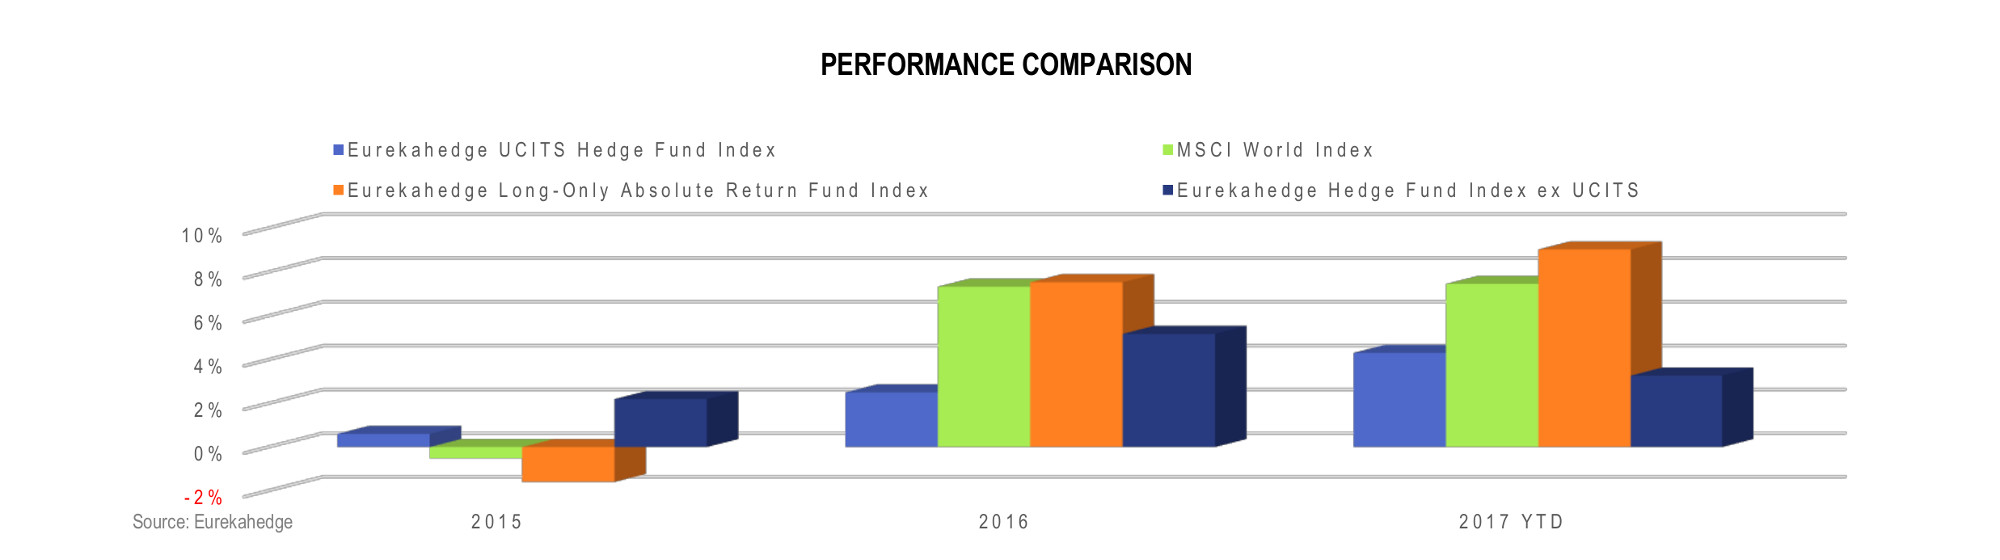 UCITS Hedge Fund Infographic July 2017 - Performance comparison